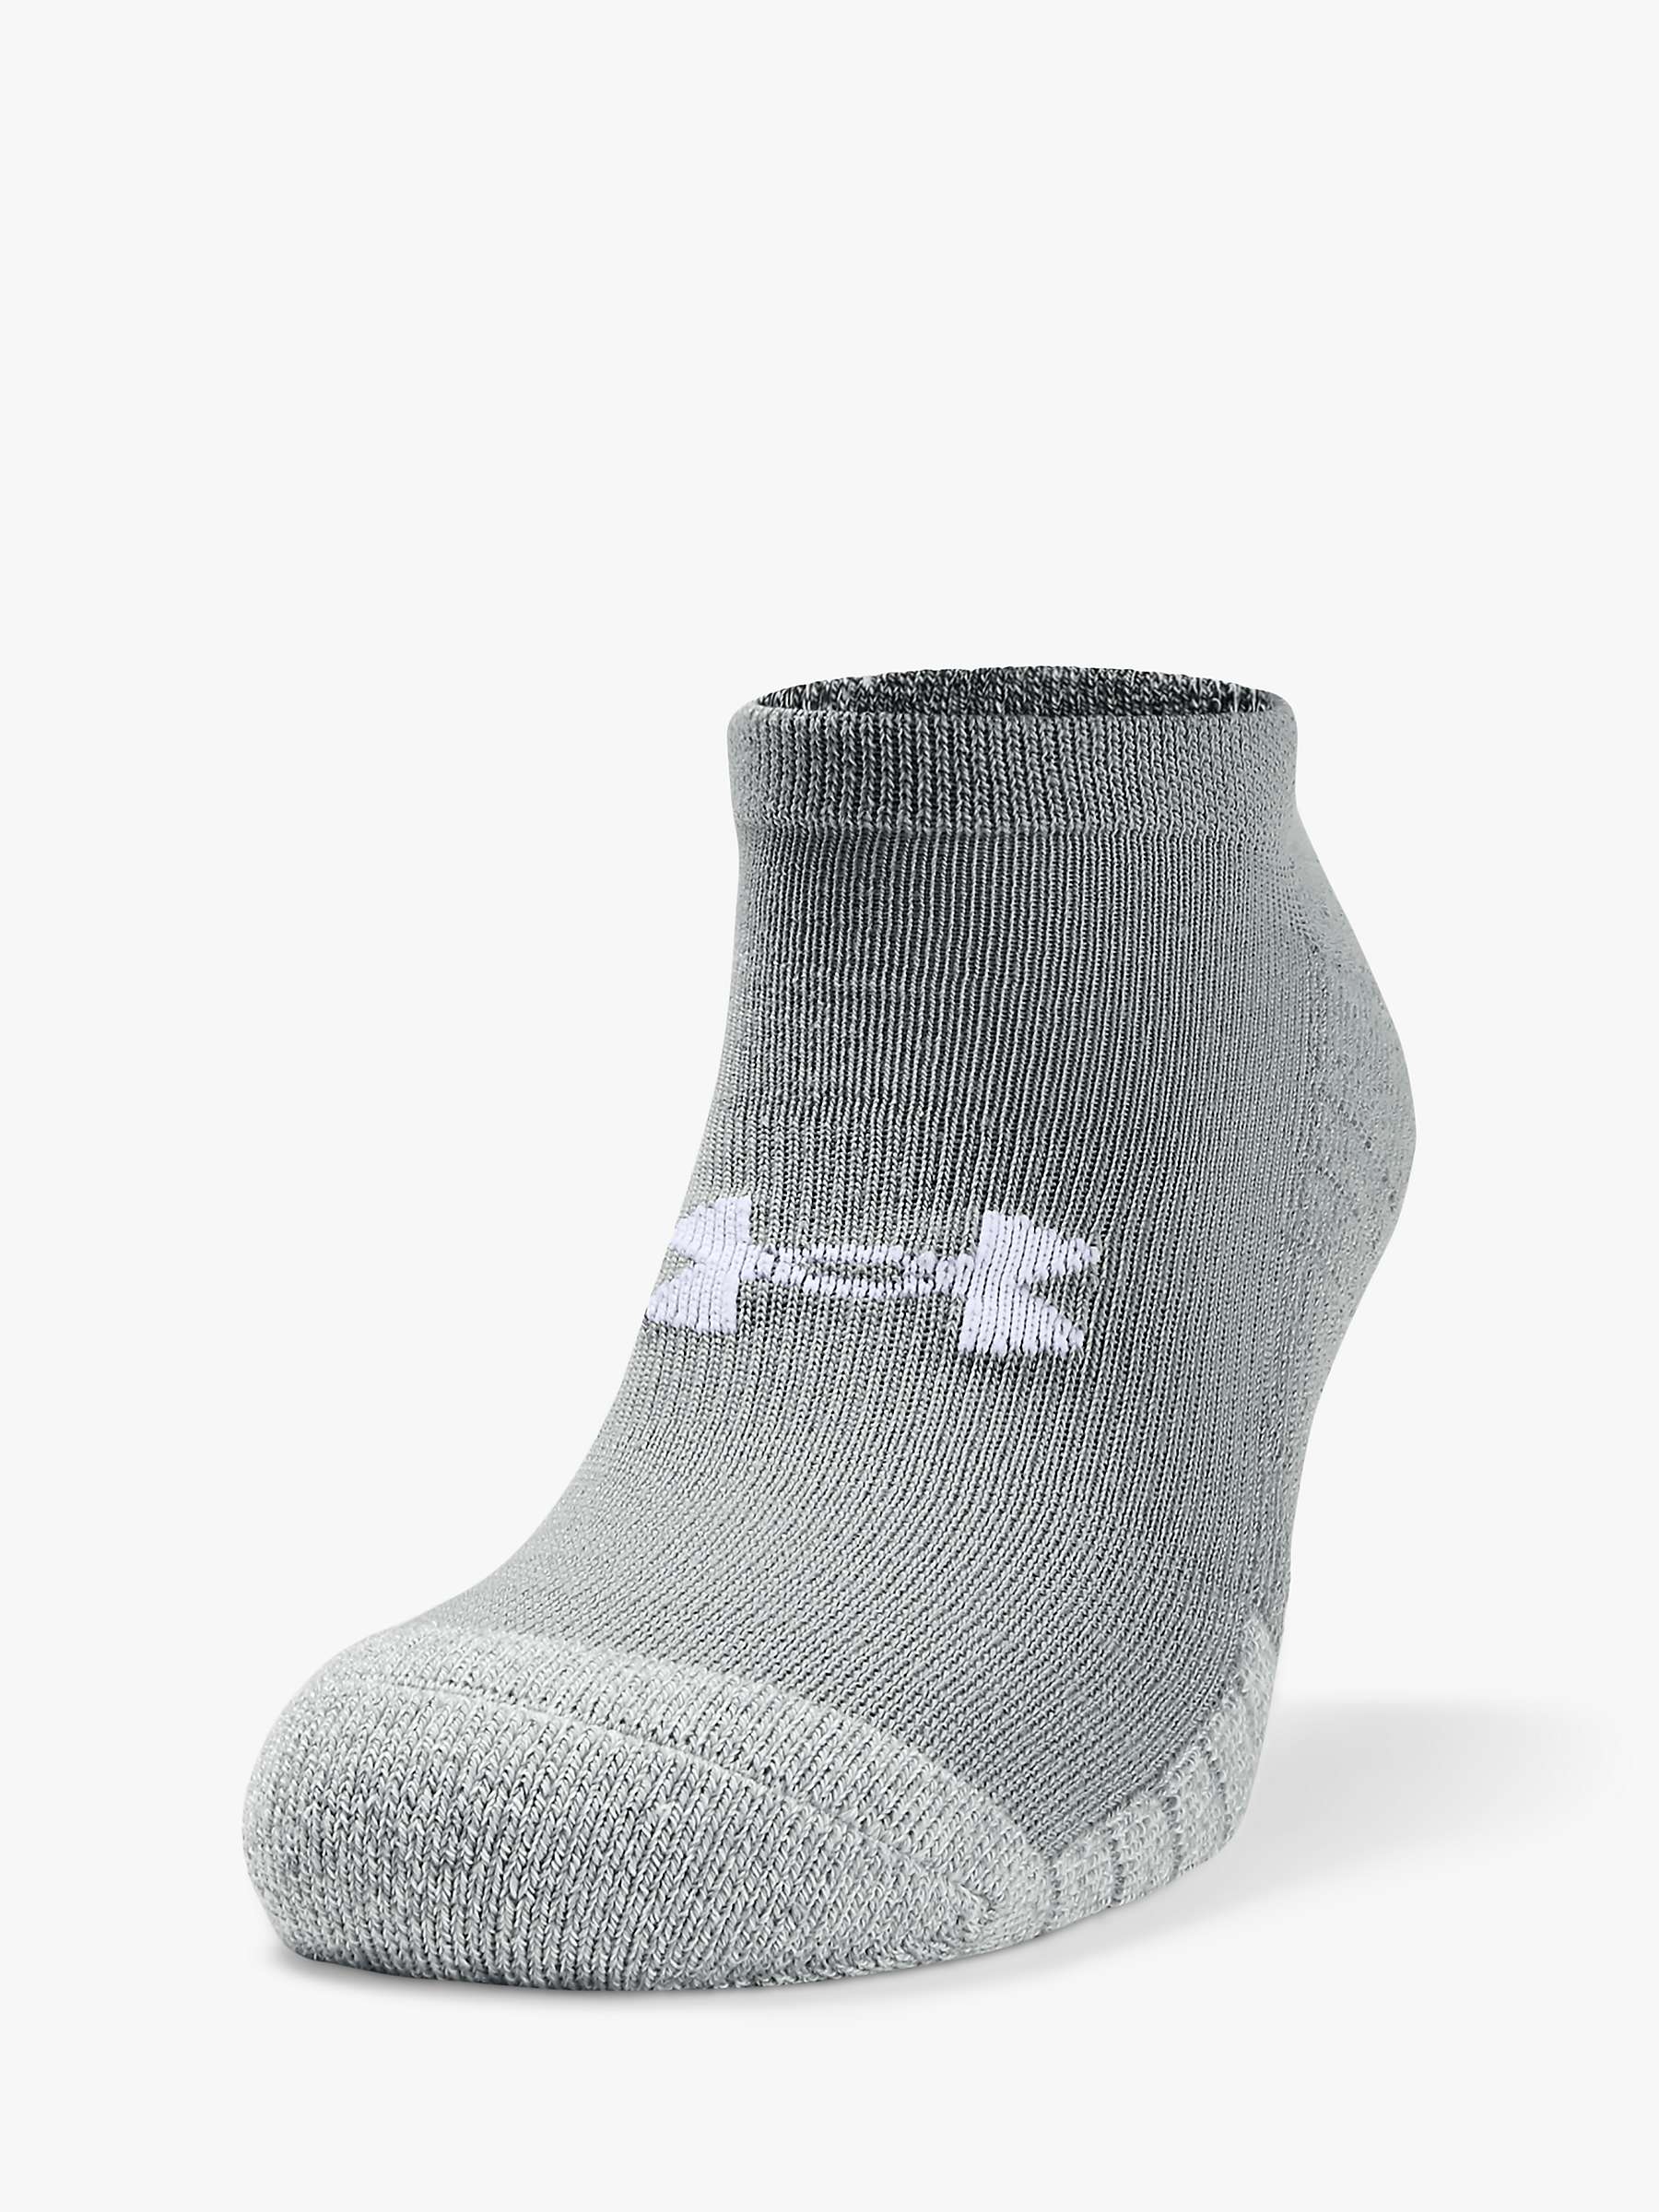 Buy Under Armour HeatGear® No Show Gym Socks, Pack of 3 Online at johnlewis.com